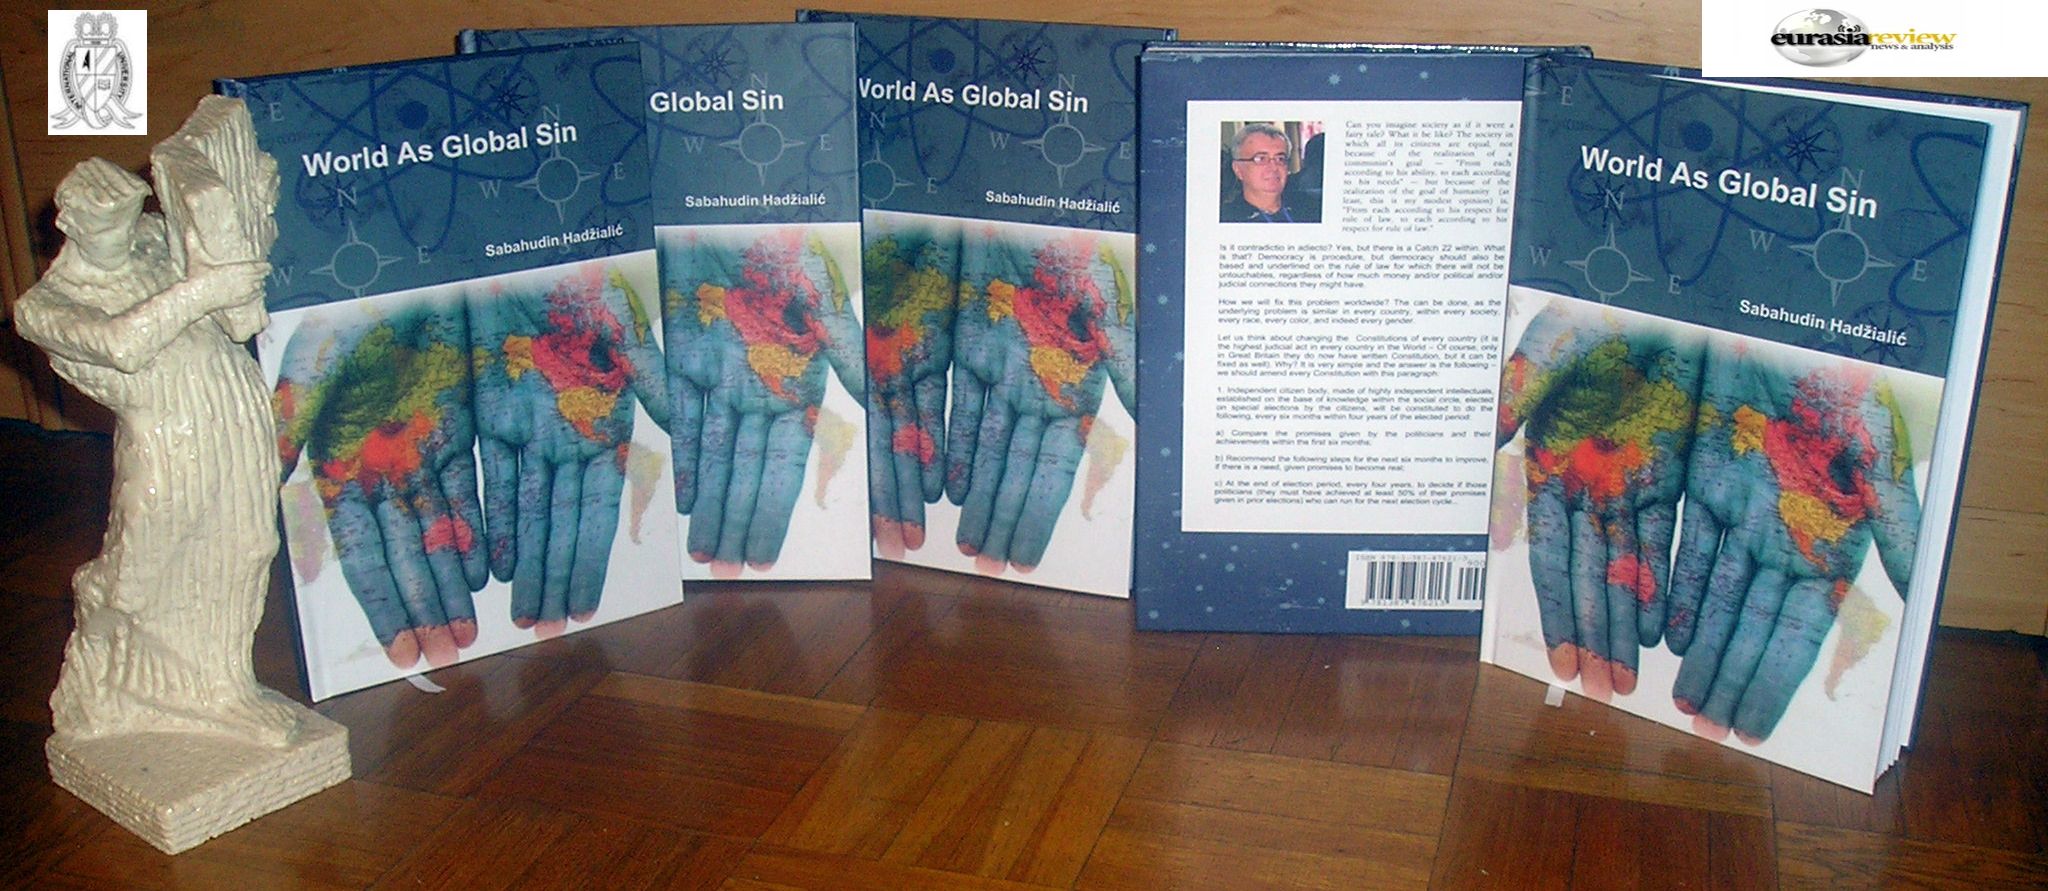 The Book Of IUT Professor Titled “World As Global Sin” Published In The United States Of America